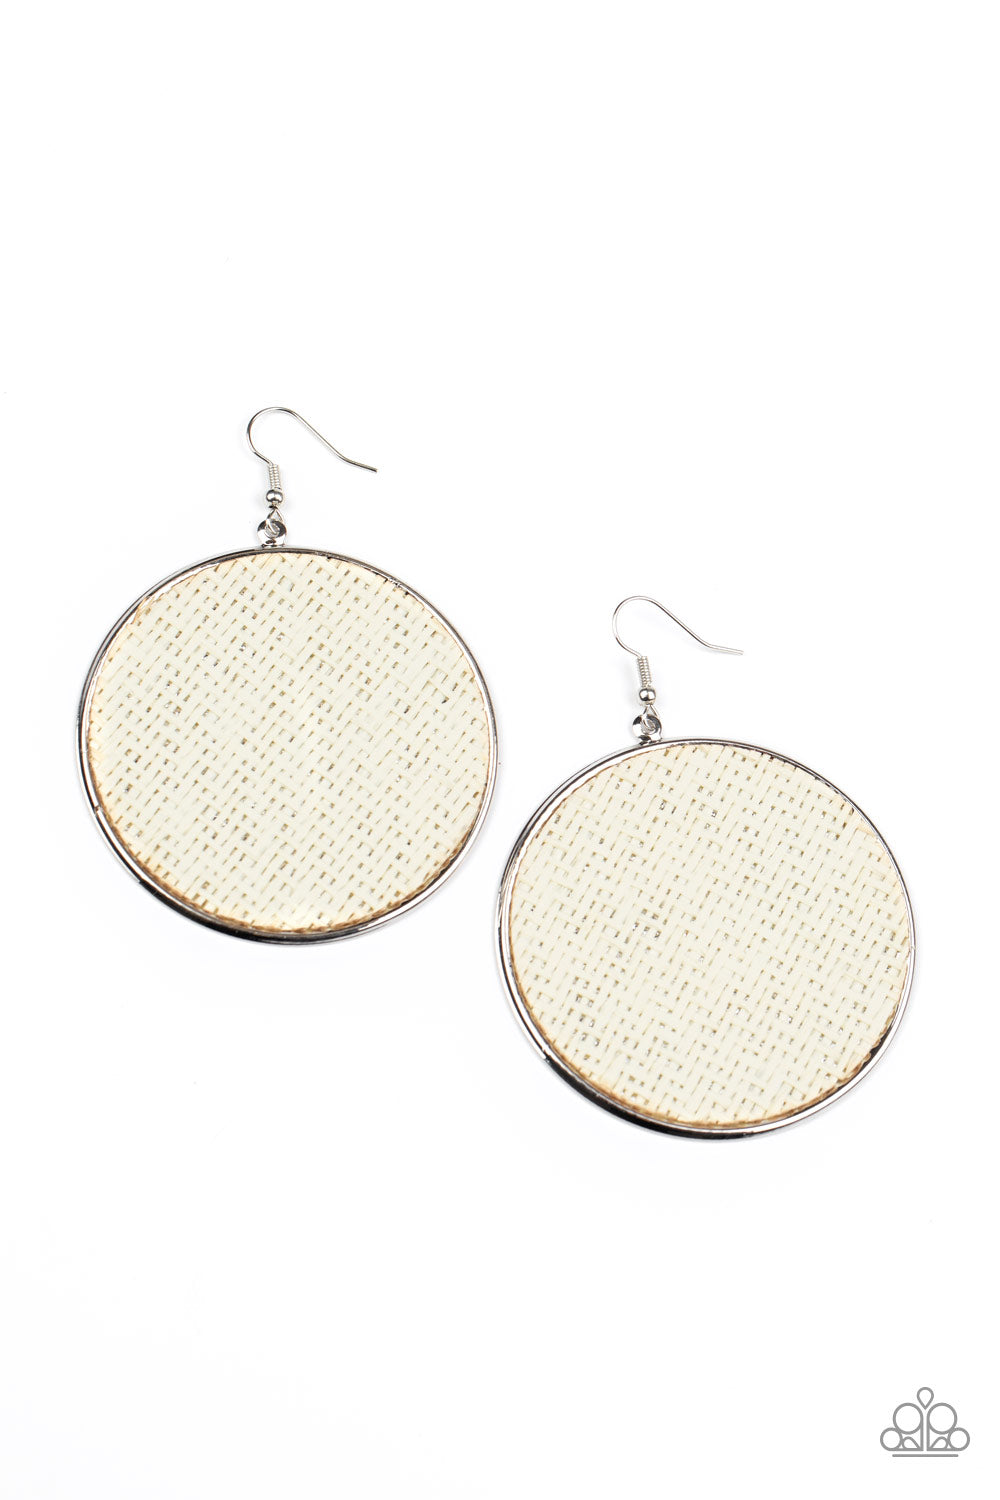 Paparazzi Accessories - Wonderfully Woven - White Earrings